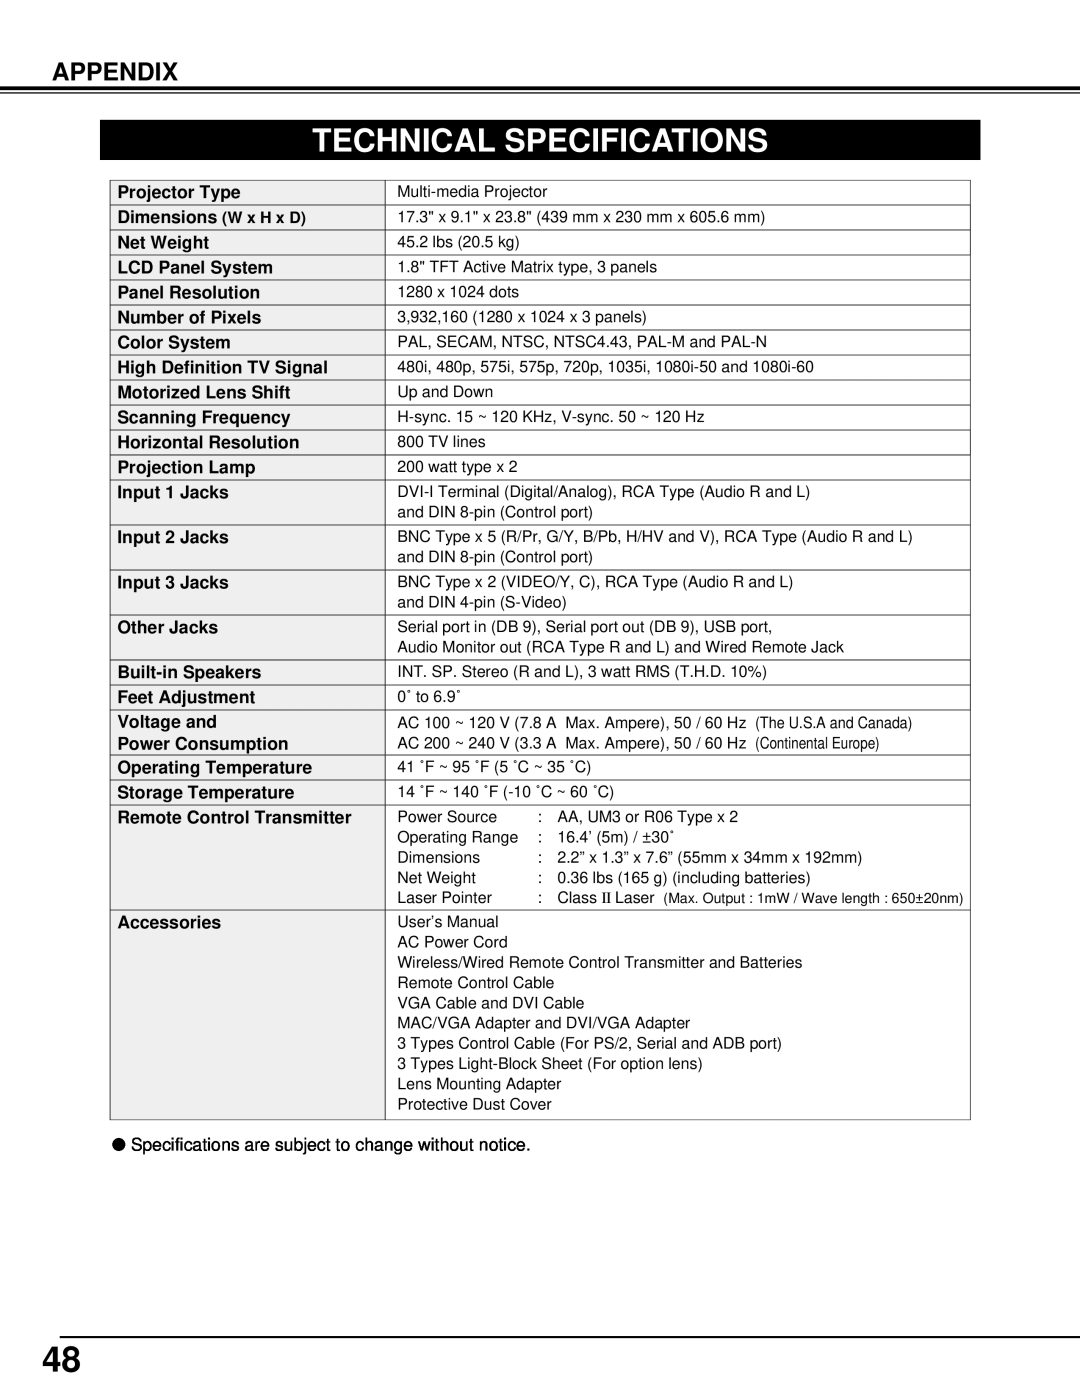 Christie Digital Systems 38-VIV301-01 user manual Technical Specifications, Appendix 